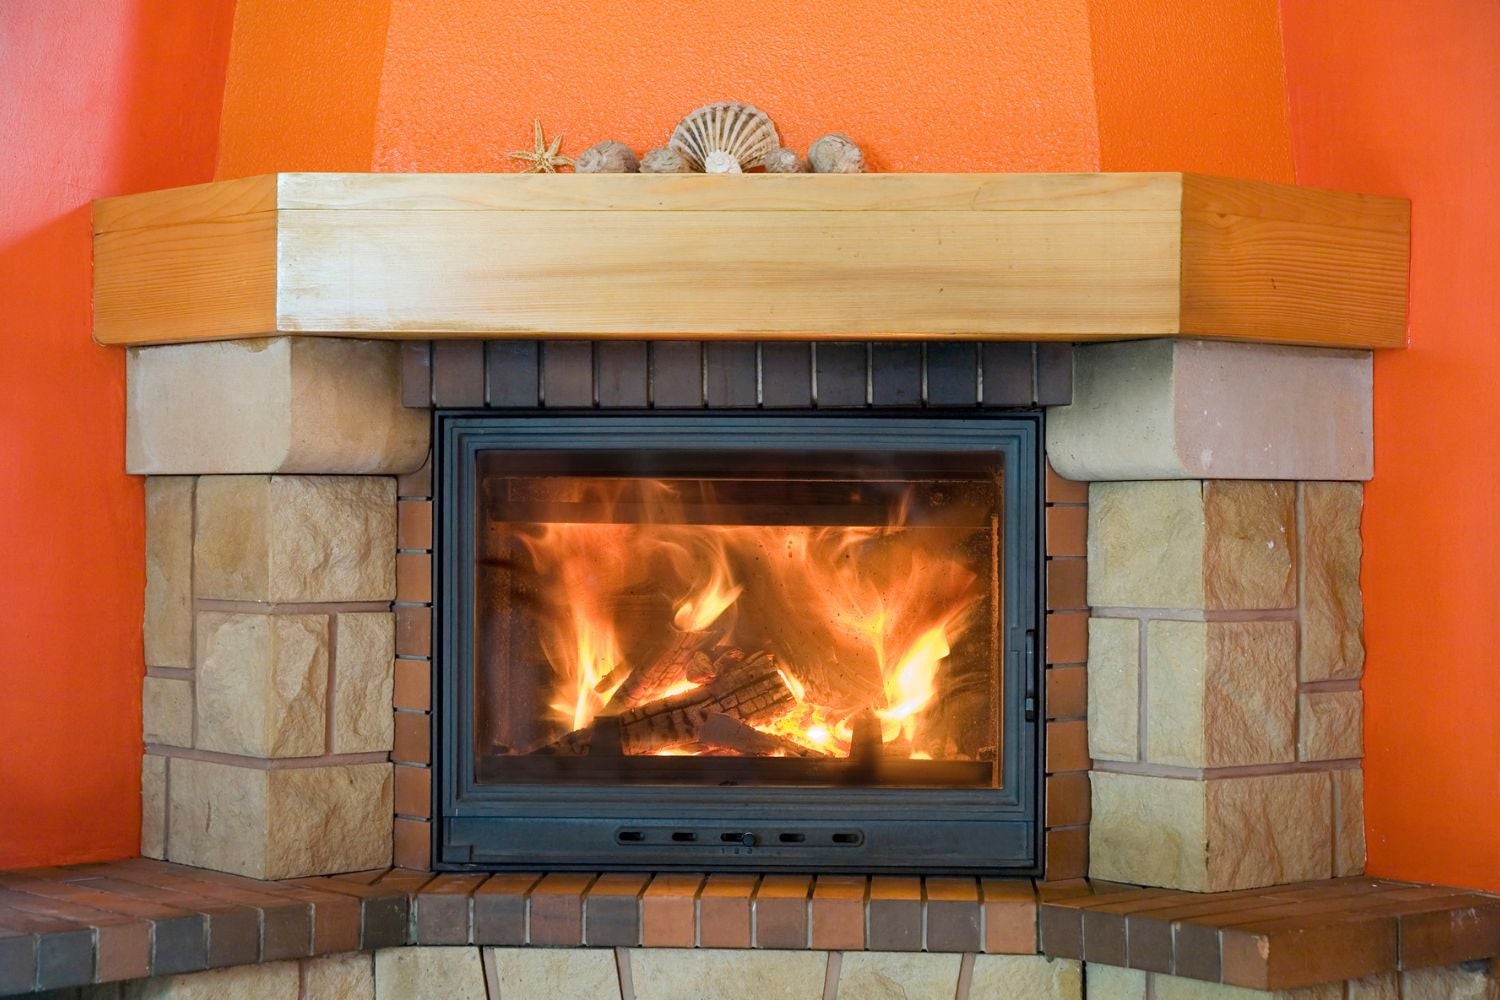 How To Use Wood Burning Fireplace With Gas Starter